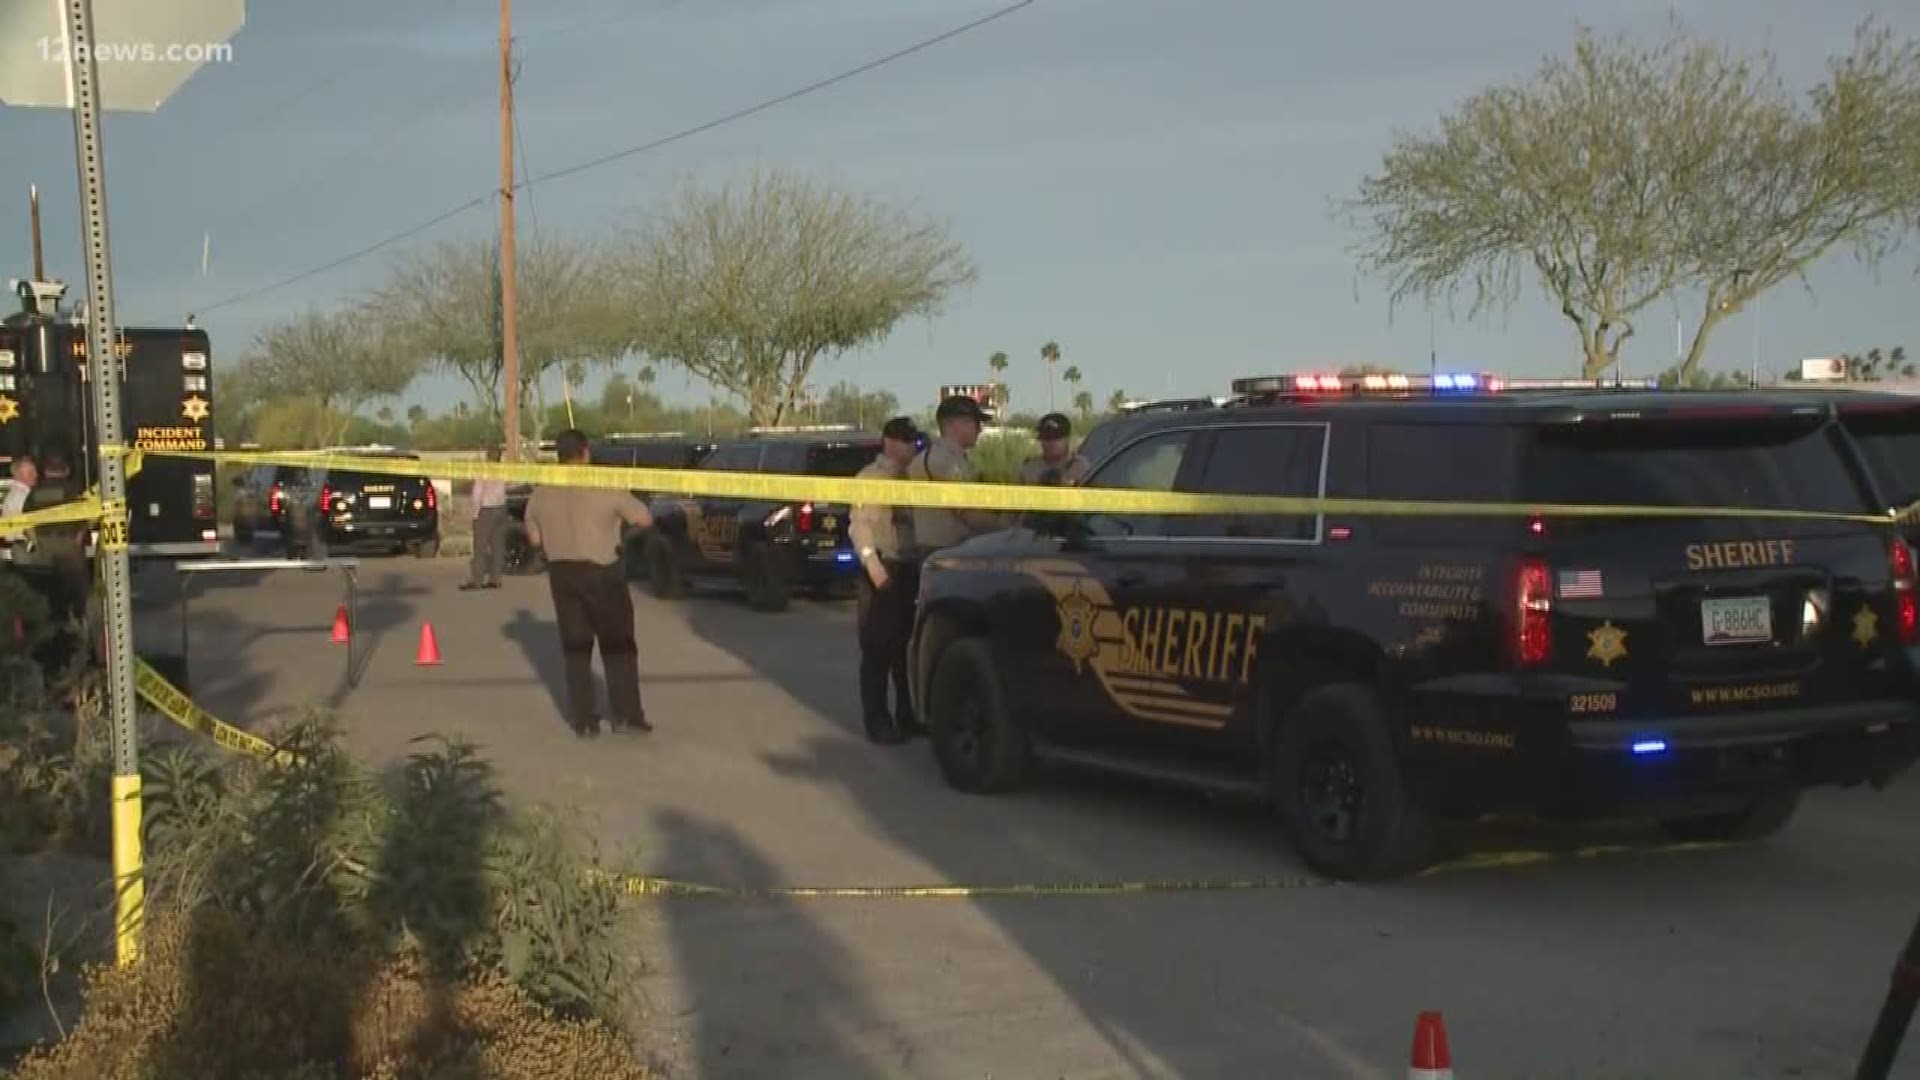 The Maricopa County Sheriff's Office says the suspect in a deputy-involved shooting in Mesa Monday evening has died. The shooting is under investigation.